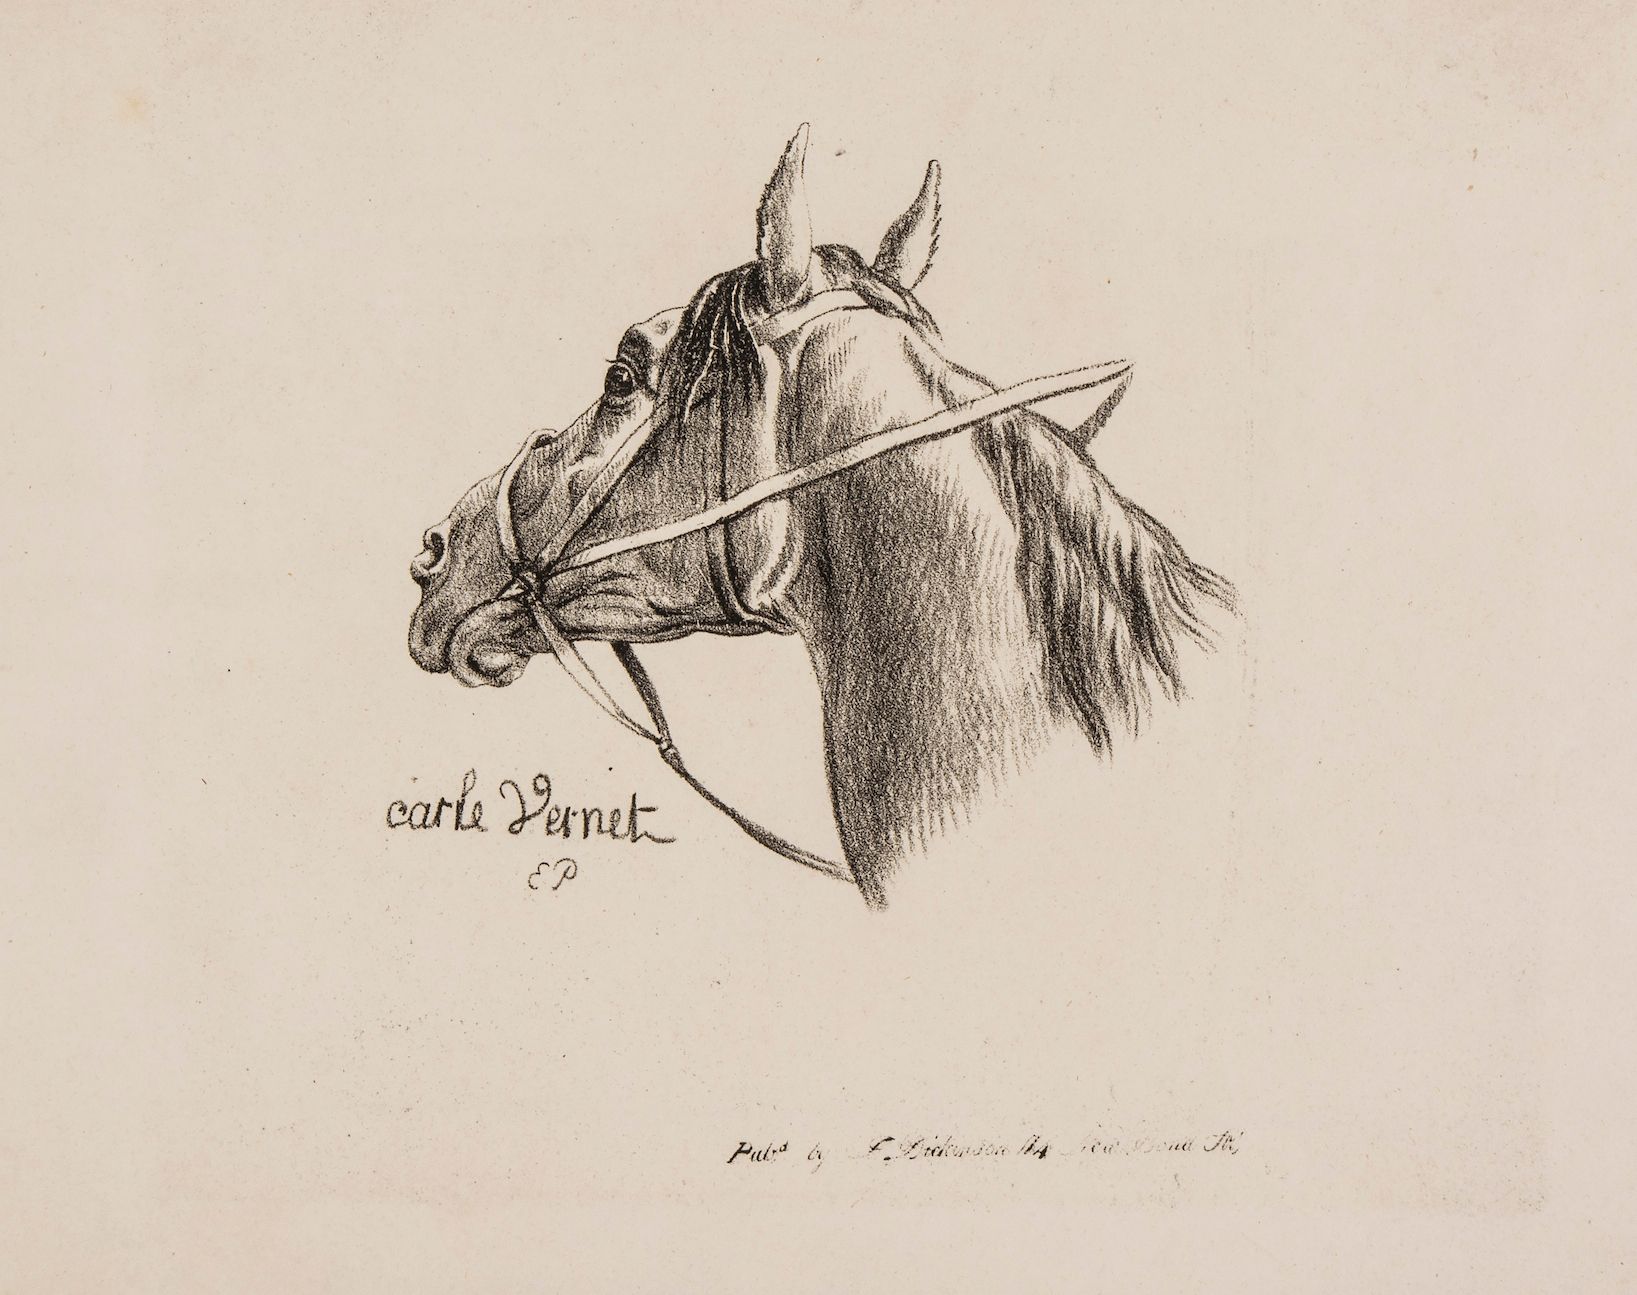 After Carle Vernet - A group of 17 studies of horses' heads, Lithographs, By E. Purcell, 1821, for - Image 2 of 3